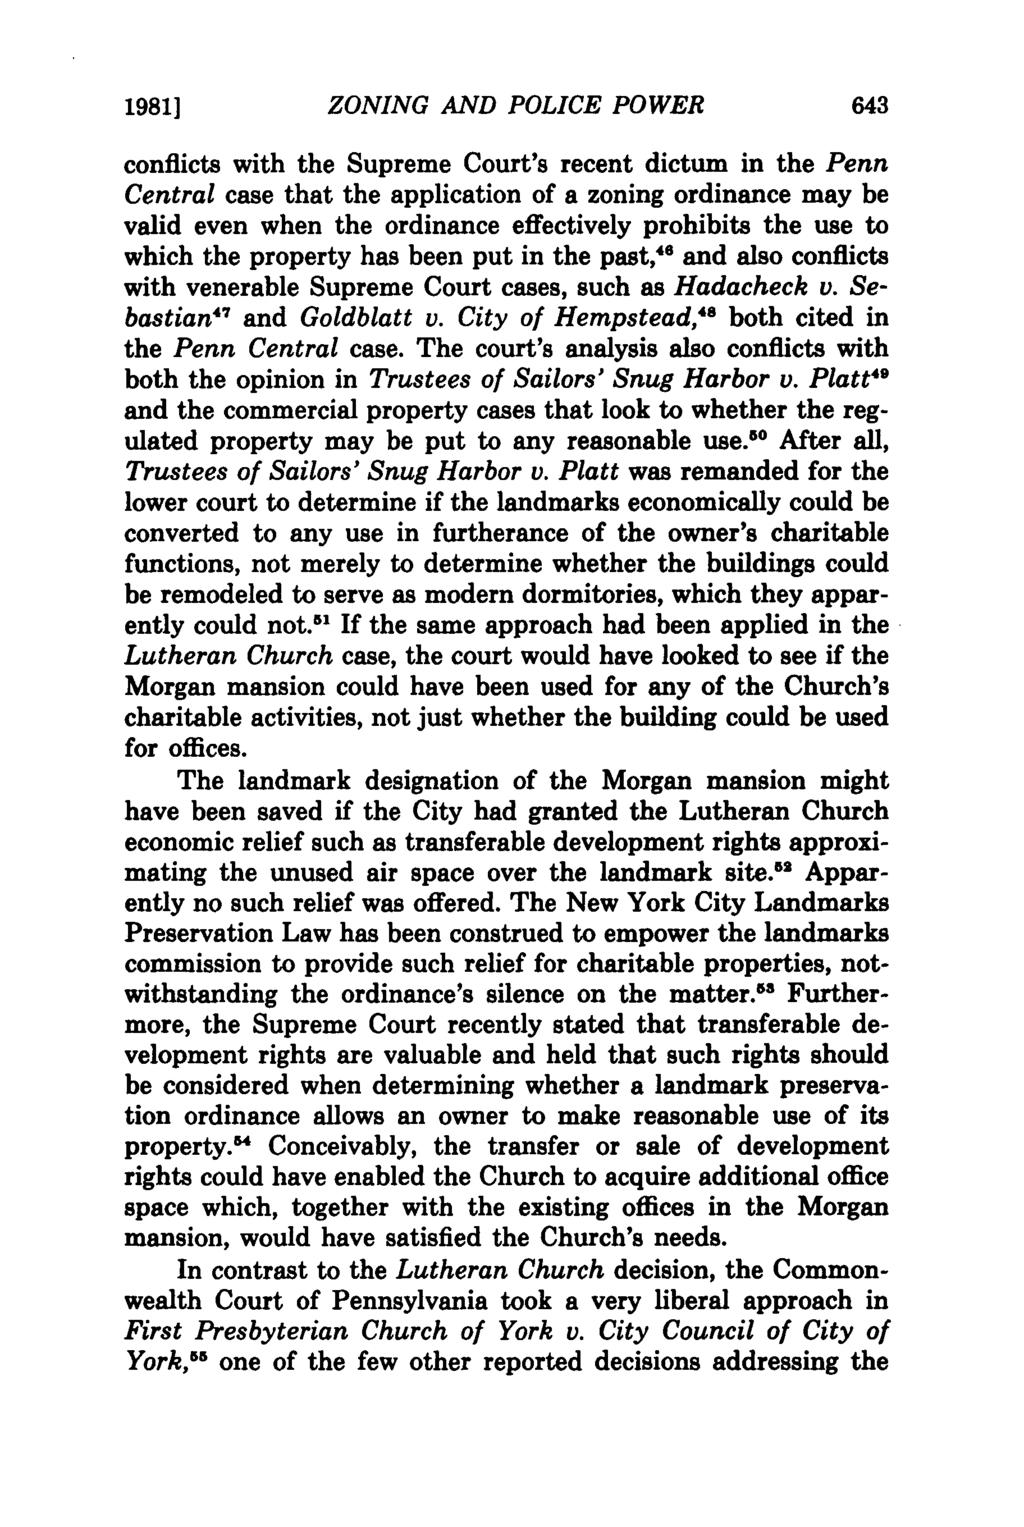 1981] ZONING AND POLICE POWER conflicts with the Supreme Court's recent dictum in the Penn Central case that the application of a zoning ordinance may be valid even when the ordinance effectively